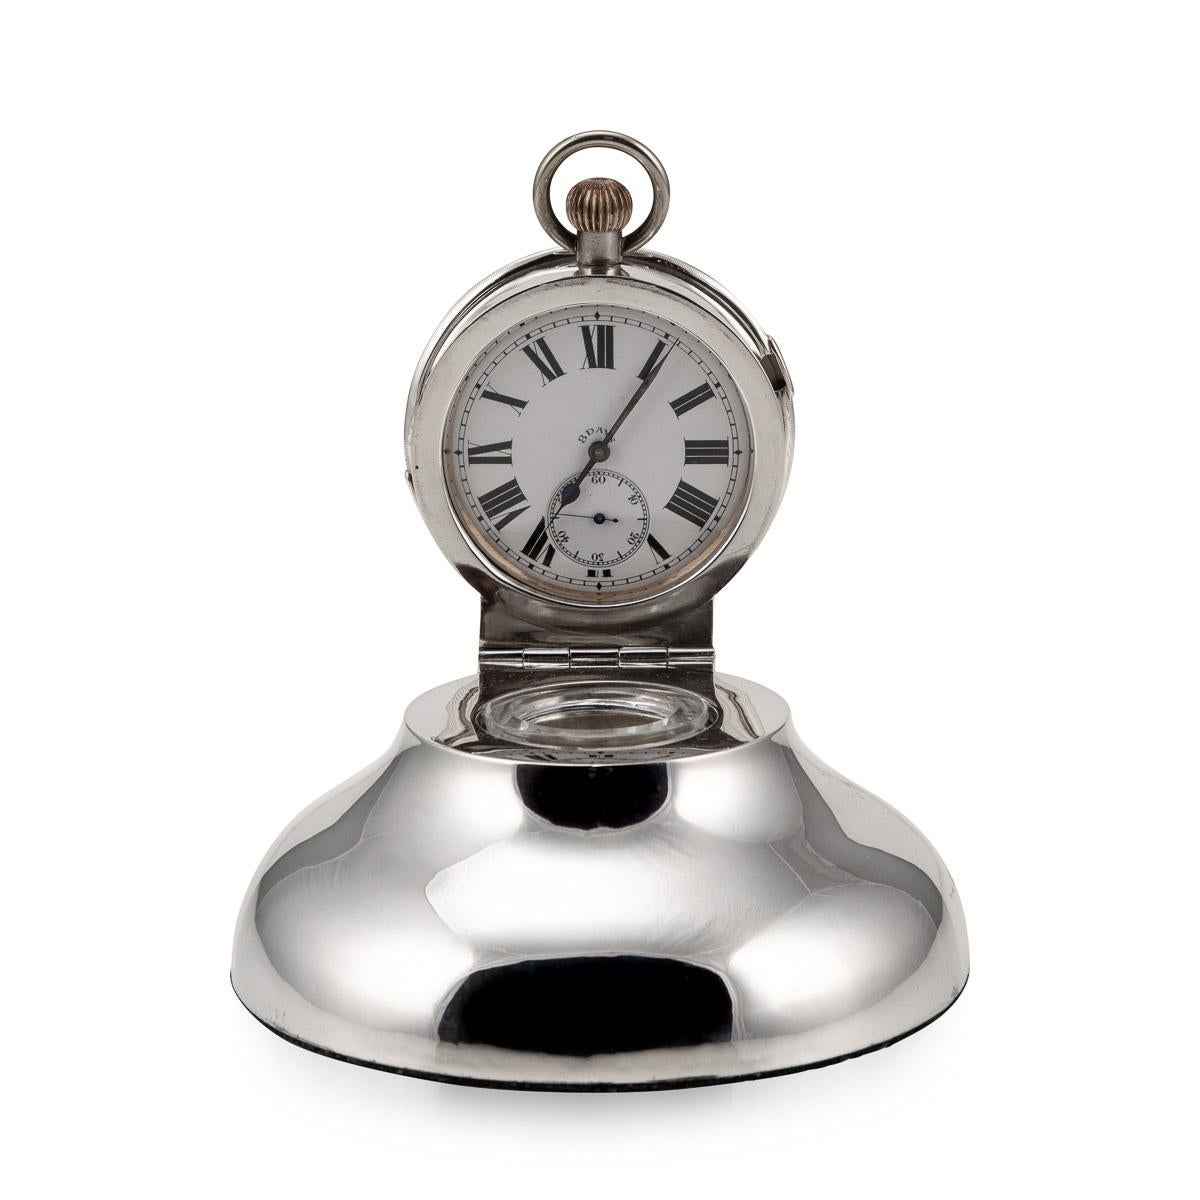 20th century Edwardian silver capstan shaped inkwell with an 8 day goliath clock. The hinged cover is set with a silver plated clock, with a white dial with Roman numeral markers and subsidiary second dial.

Condition
In great condition - no